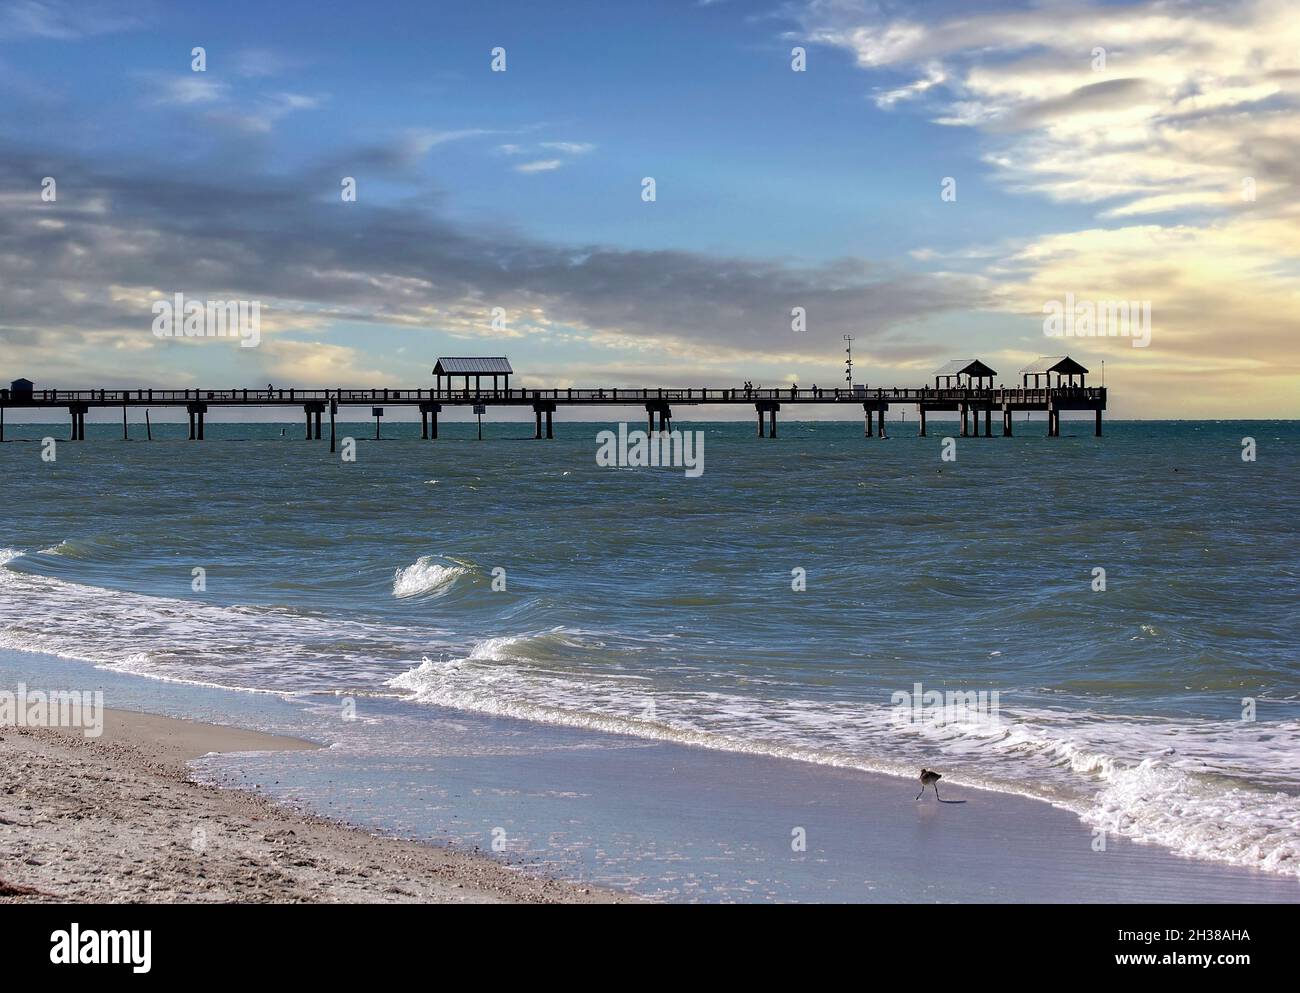 Pier 60 extending out into the Gulf of Mexico in Clearwater Beach, Florida Stock Photo